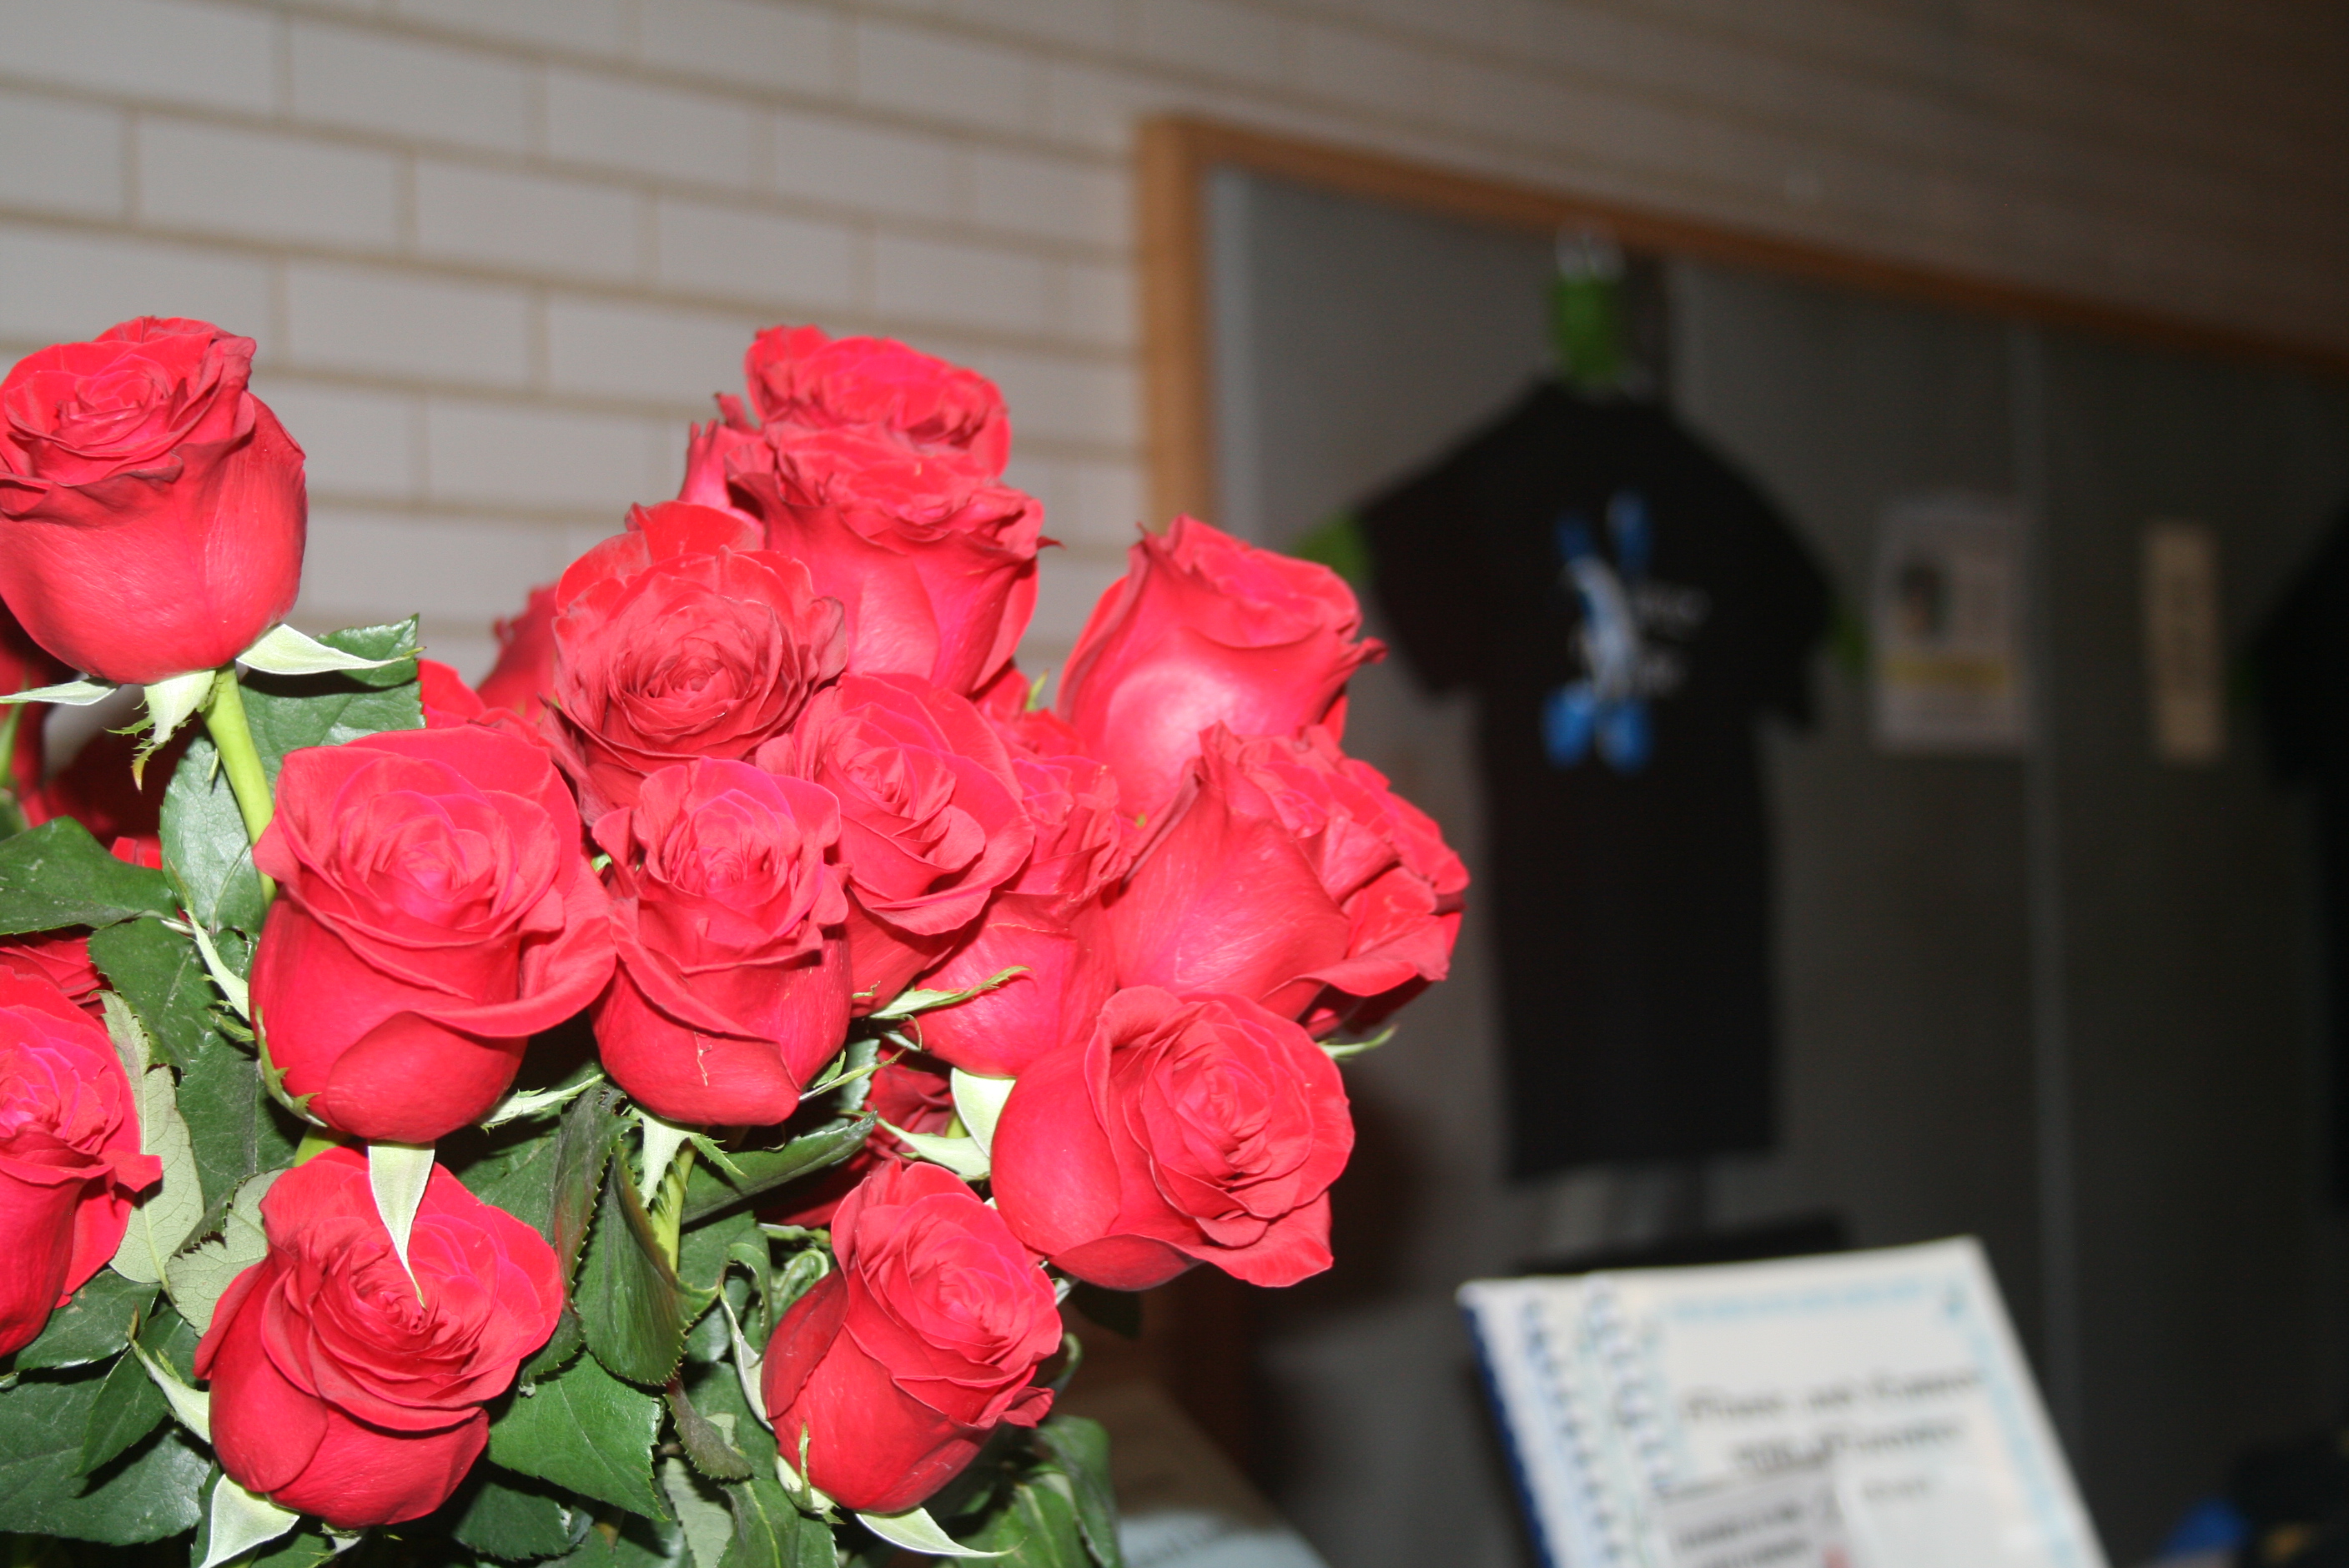 Roses for each of the performers at the Christmas recital